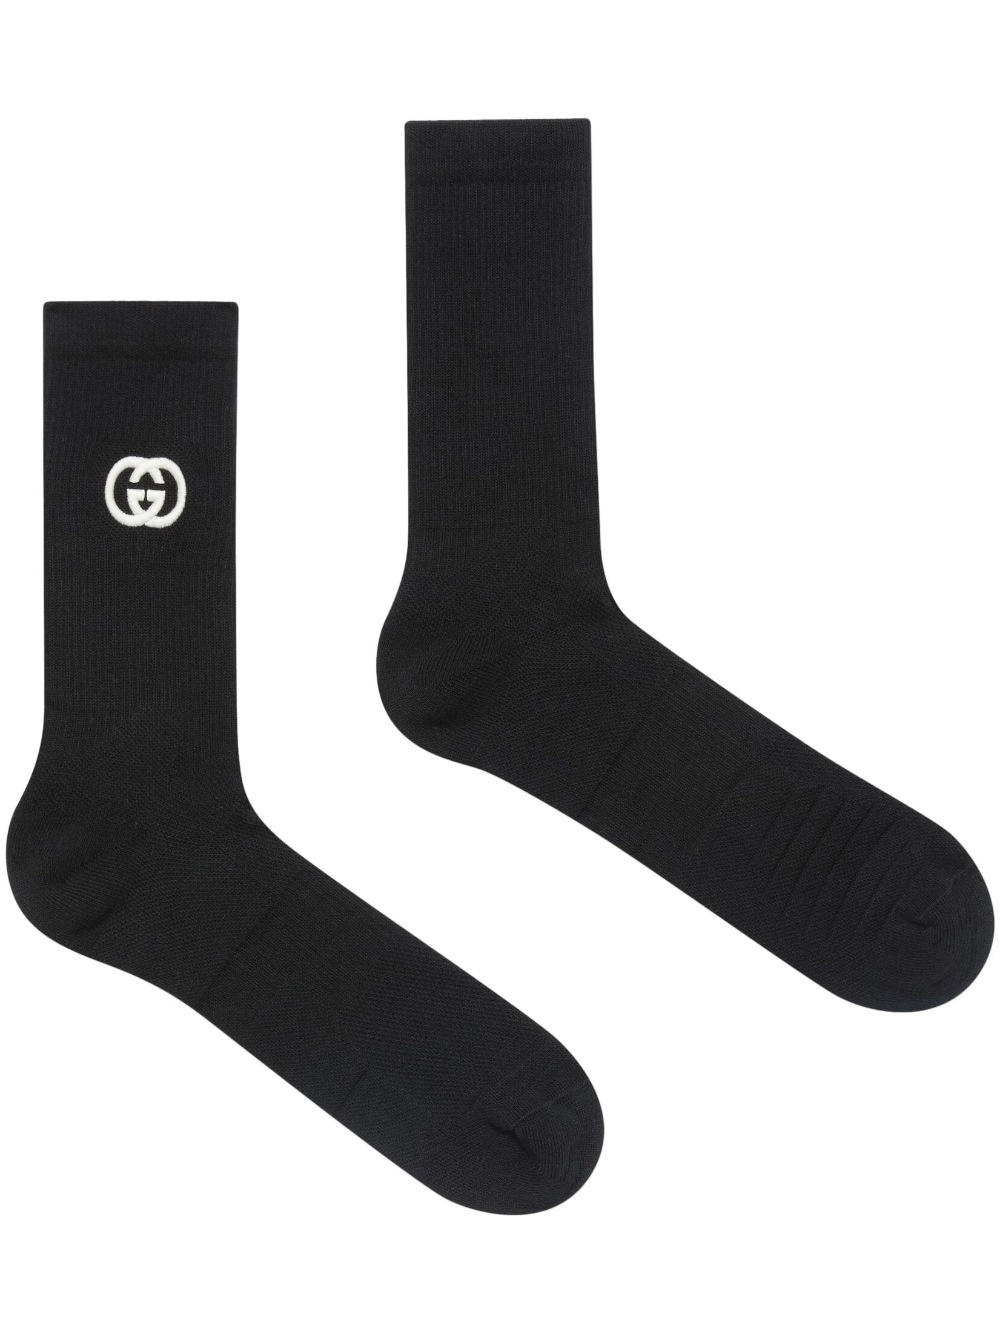 GUCCI - Cotton Blend Socks With Gg Cross